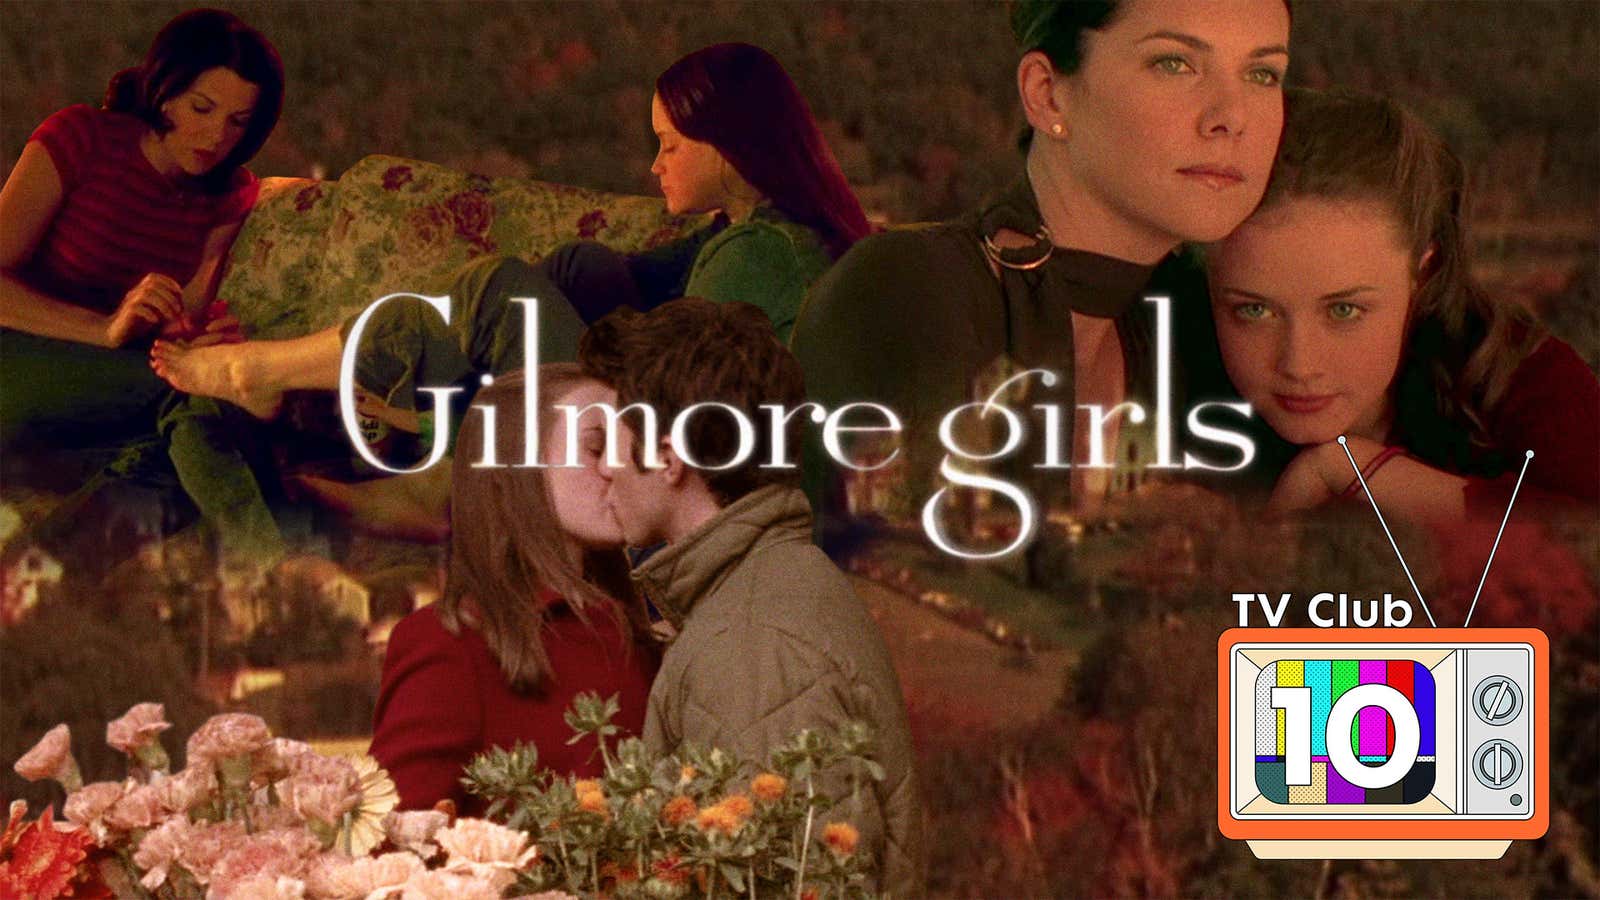 10 episodes that highlight the unparalleled small-town charm of <i>Gilmore Girls</i>